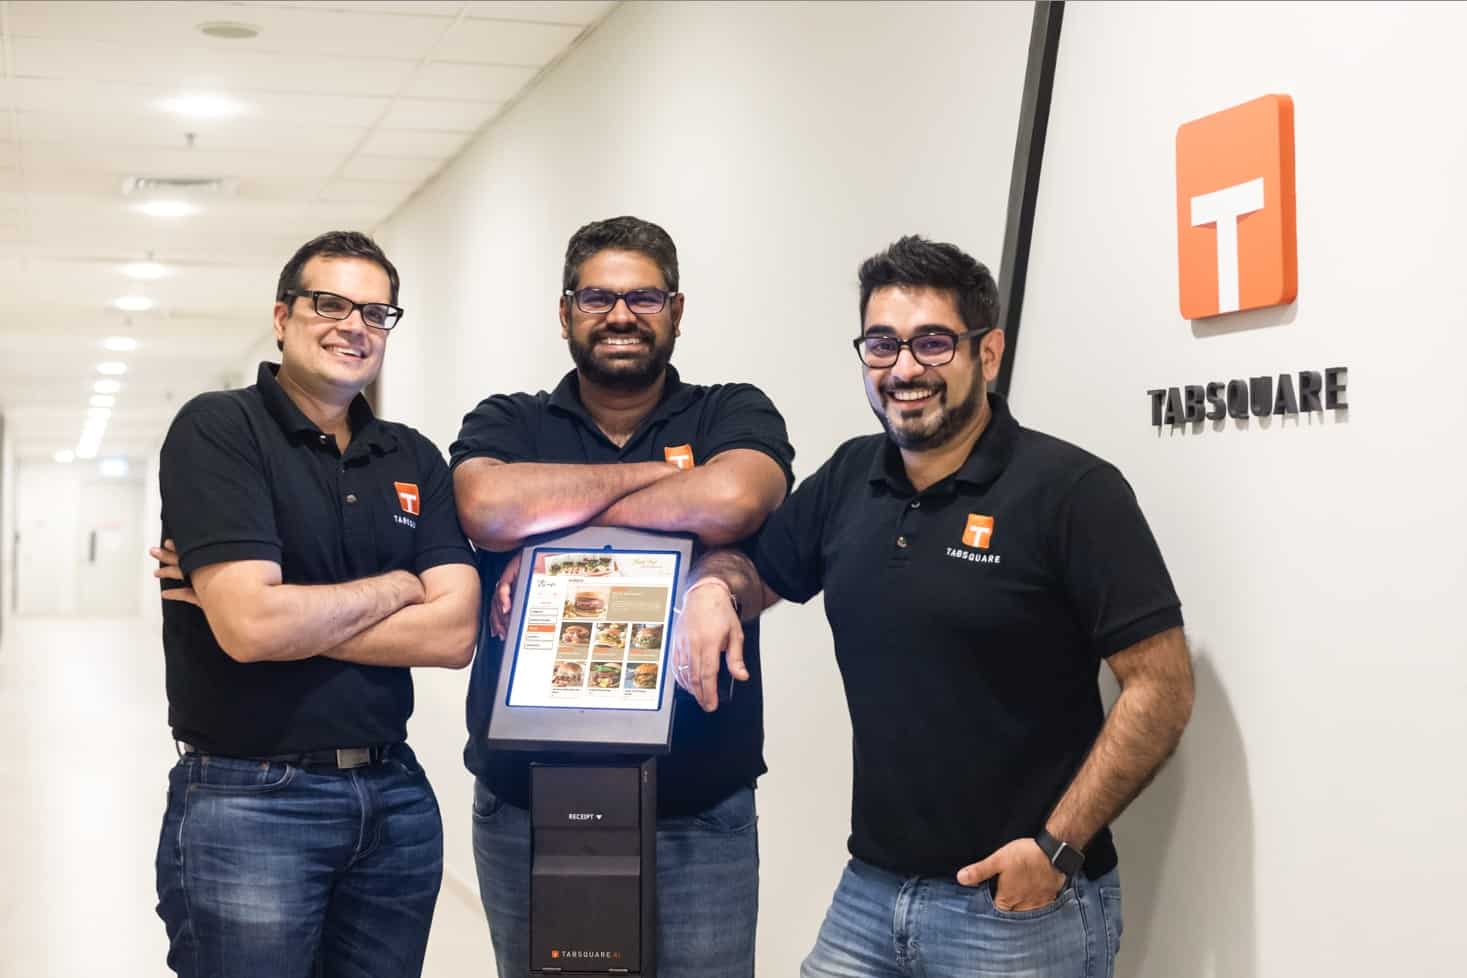 TabSquare Raises S$10 Million to Fuel AI-Powered Restaurant Solutions and Growth in New Markets